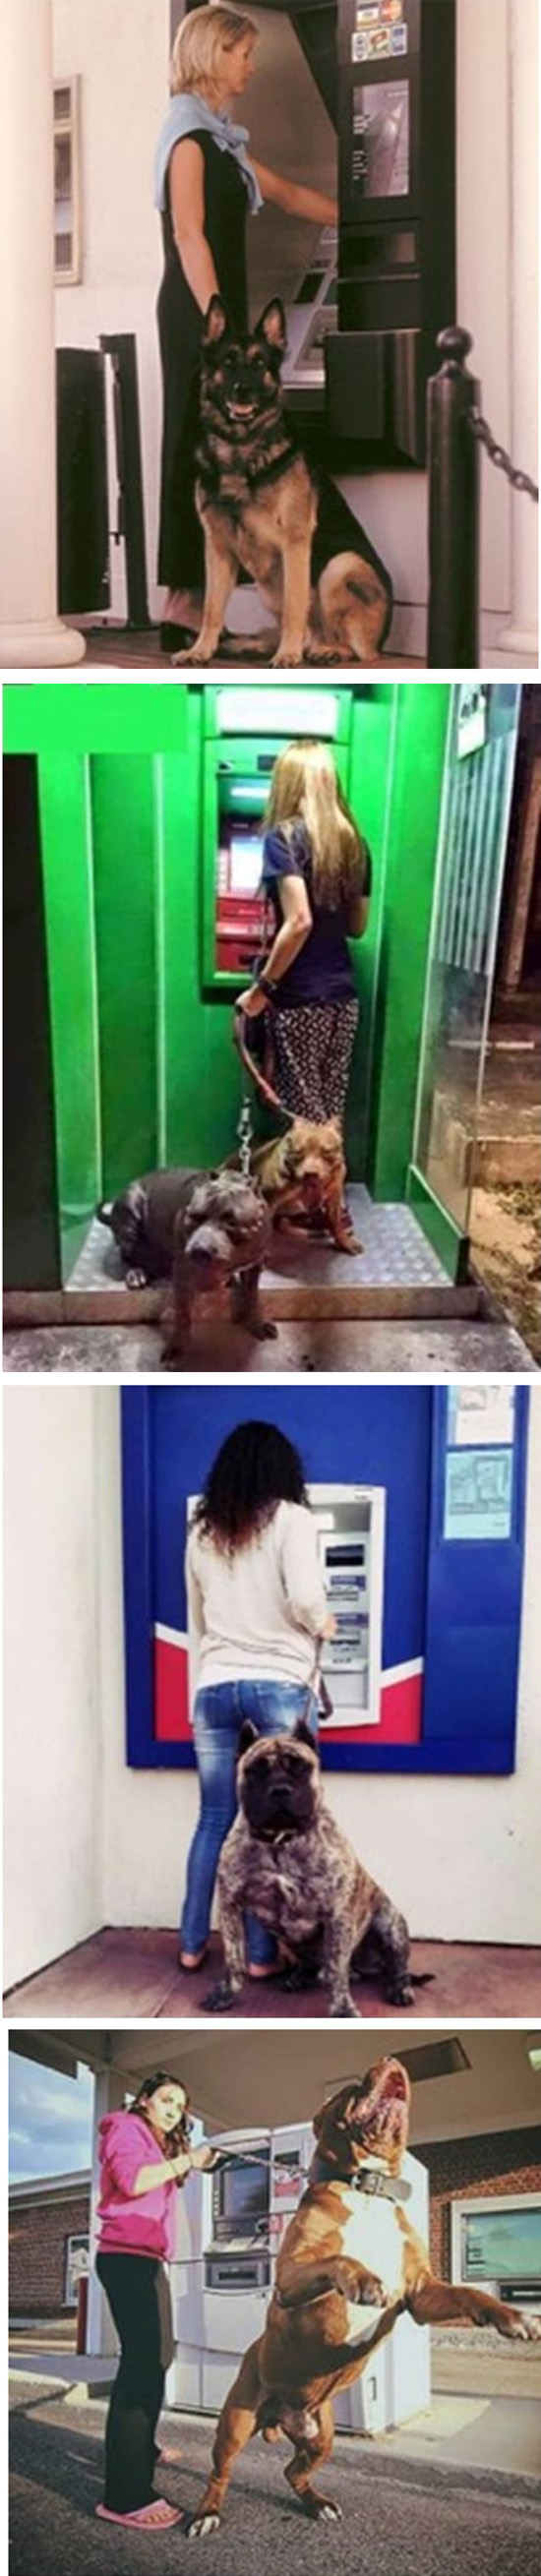 Photo collage of women going to the ATM with dogs